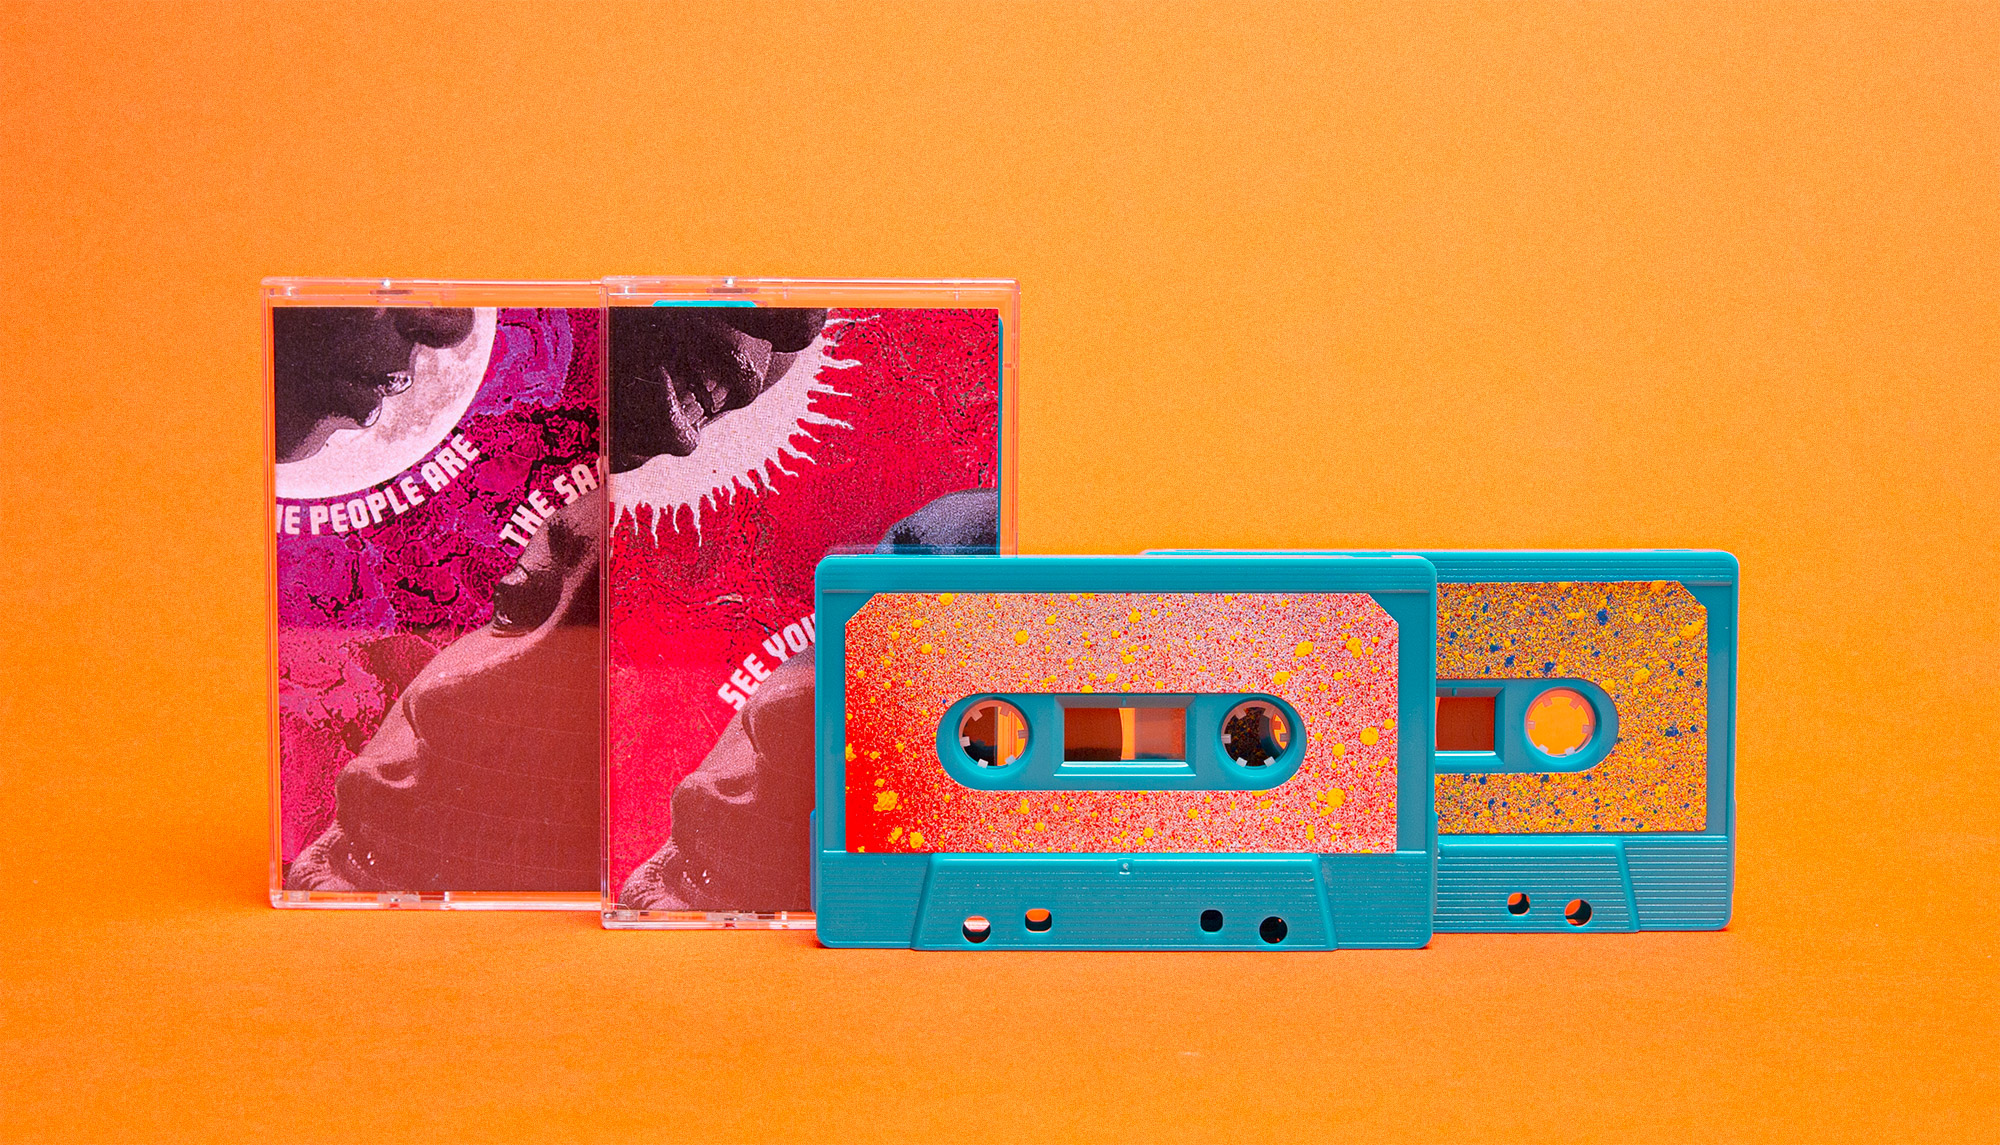 The different cassette cover versions of Sunlight/Moonlight show a woman's face looking up towards the sun/moon respectively, with a psychedelic background. The tapes are colourful and spray-painted